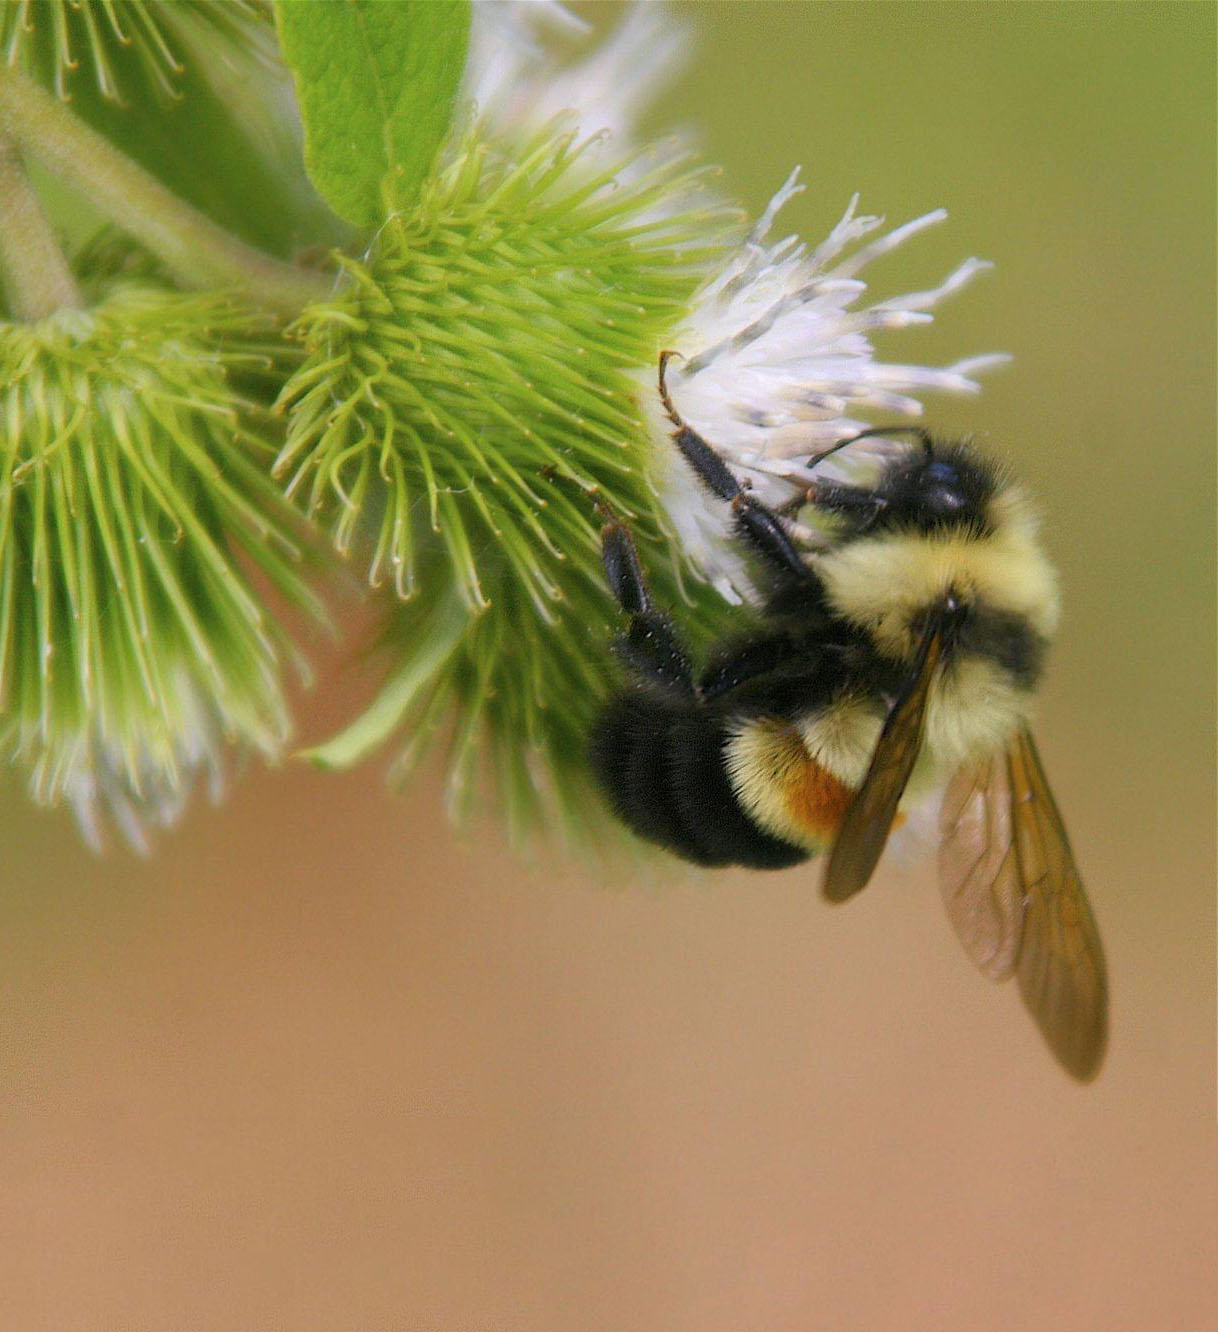 Federally-endangered bee species discovered at Pine Bend Bluffs Natural Area in Dakota County